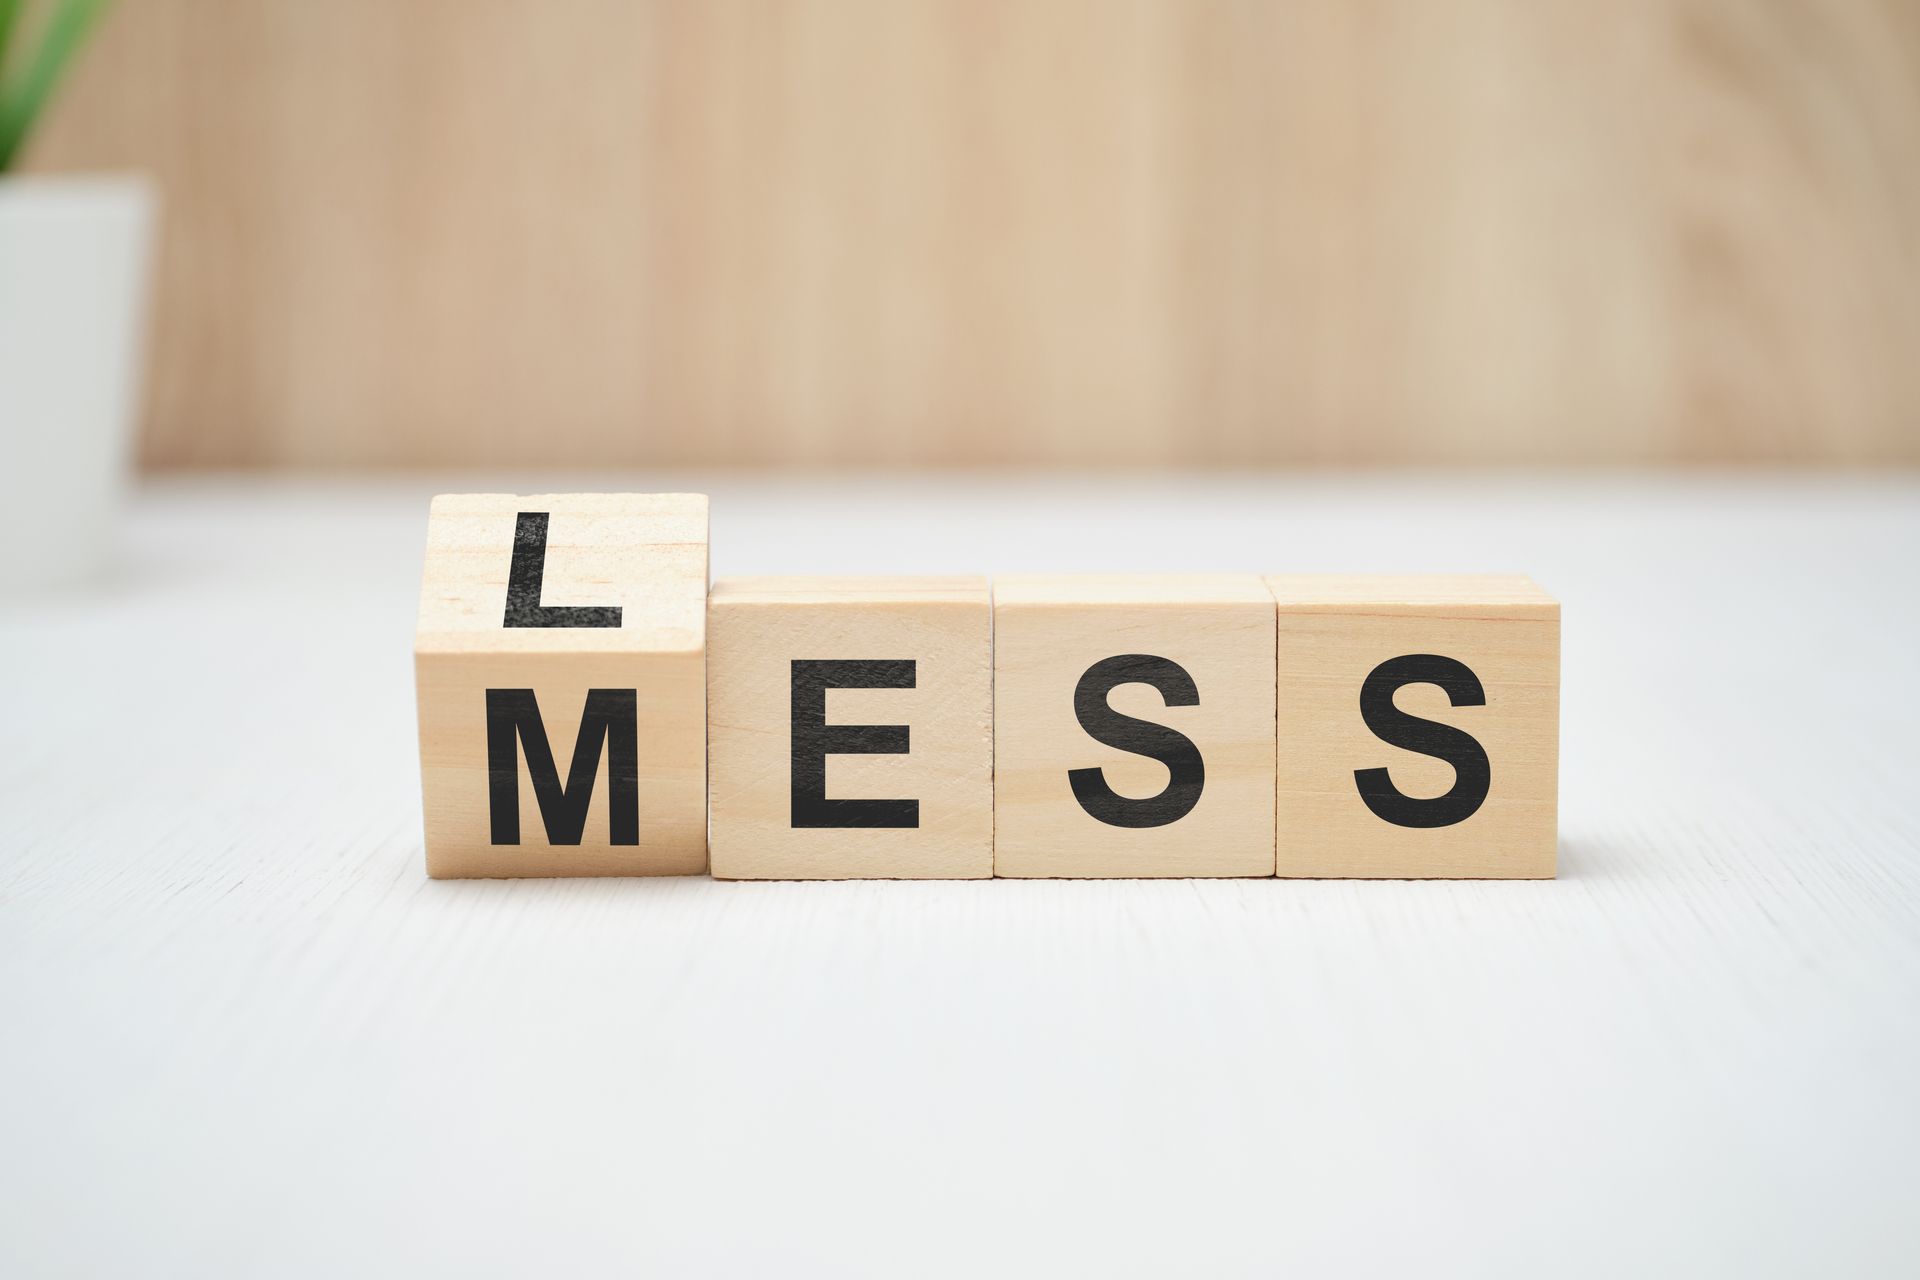 the word mess is written on wooden blocks on a table